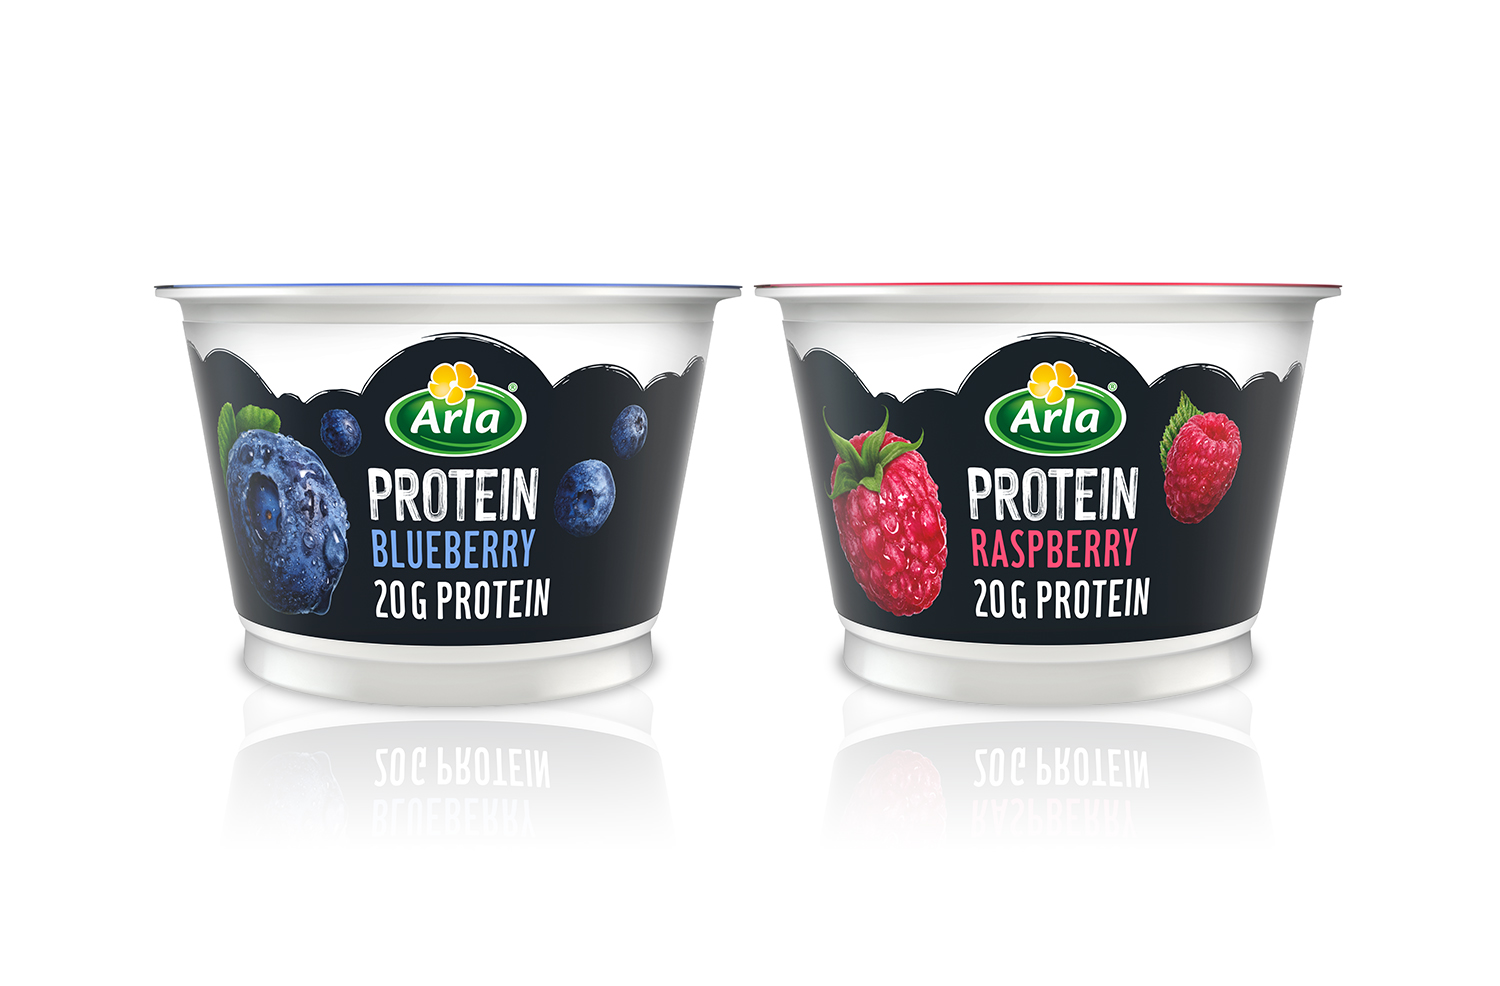 Feed your drive with Arla Protein yogurts. Delicious low fat yogurt with 20g of protein.